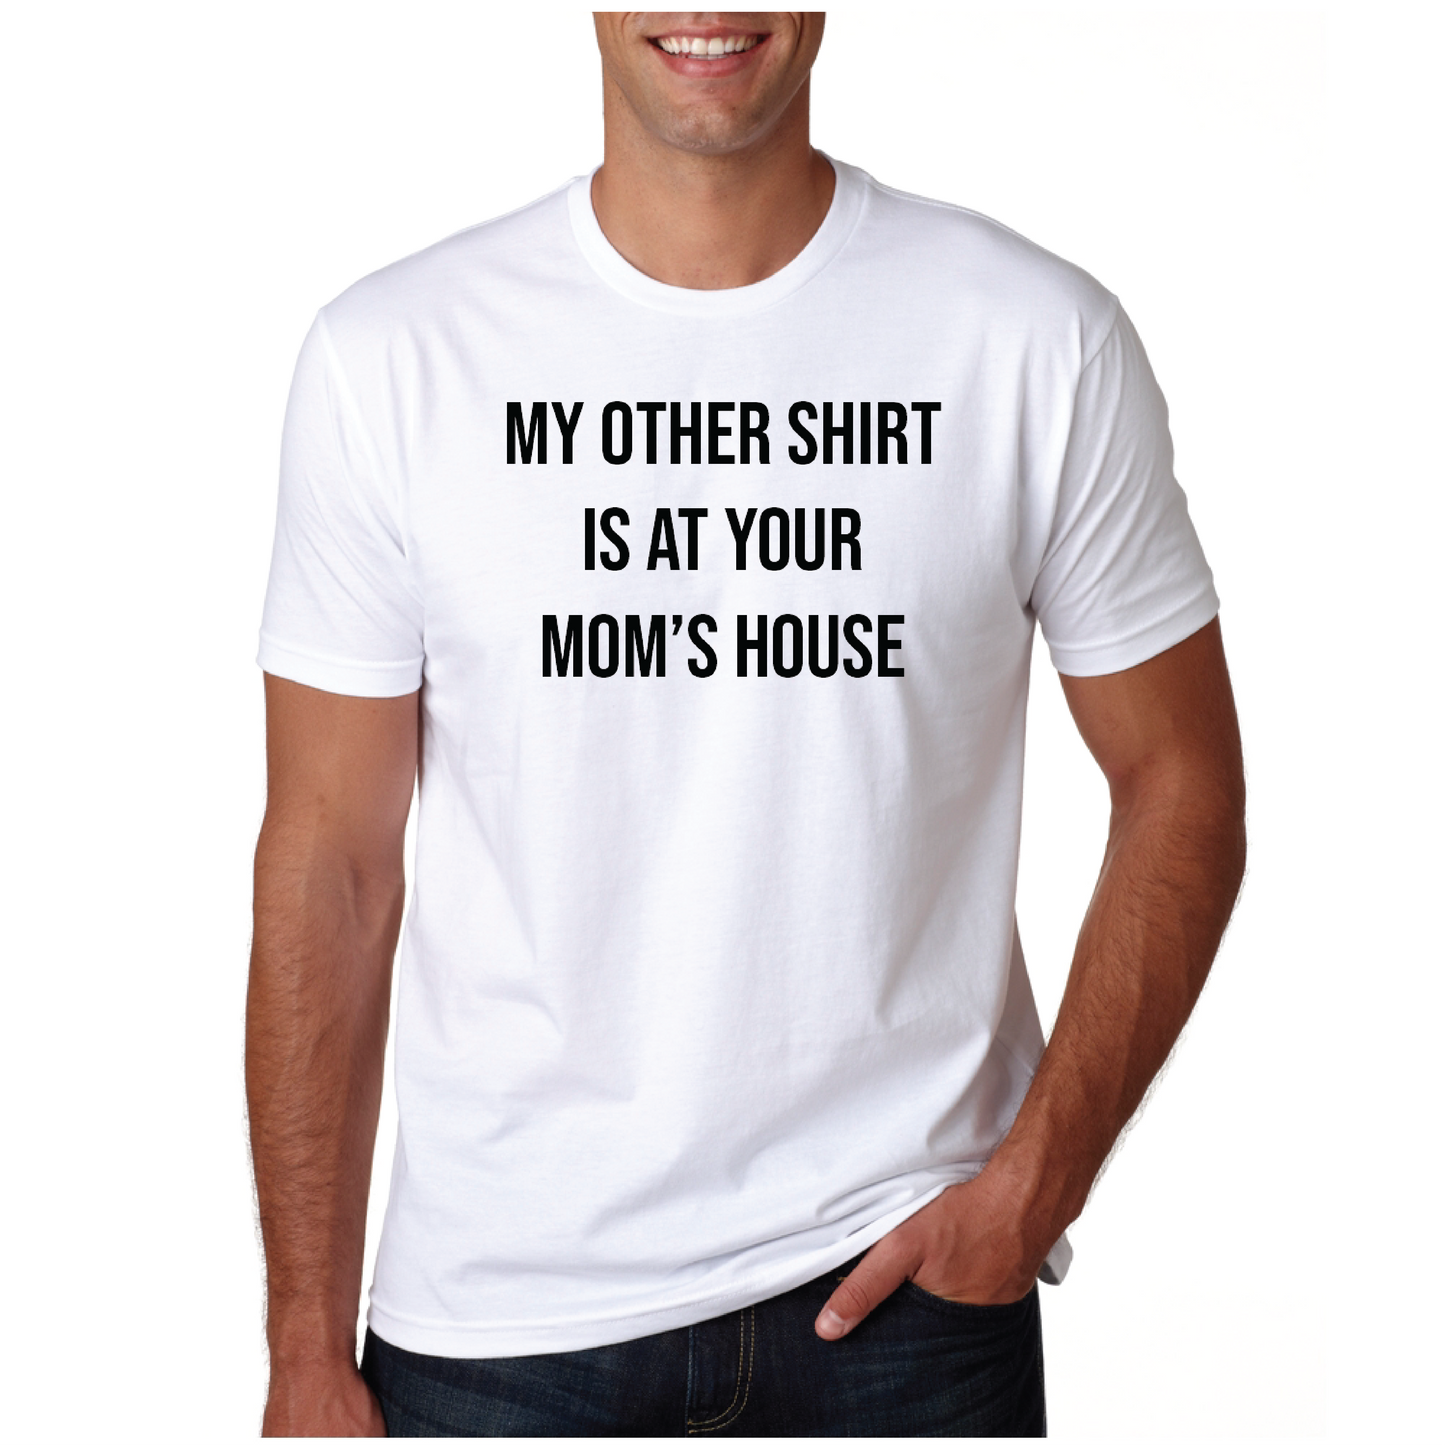 MY OTHER SHIRT IS AT YOUR MOM'S HOUSE